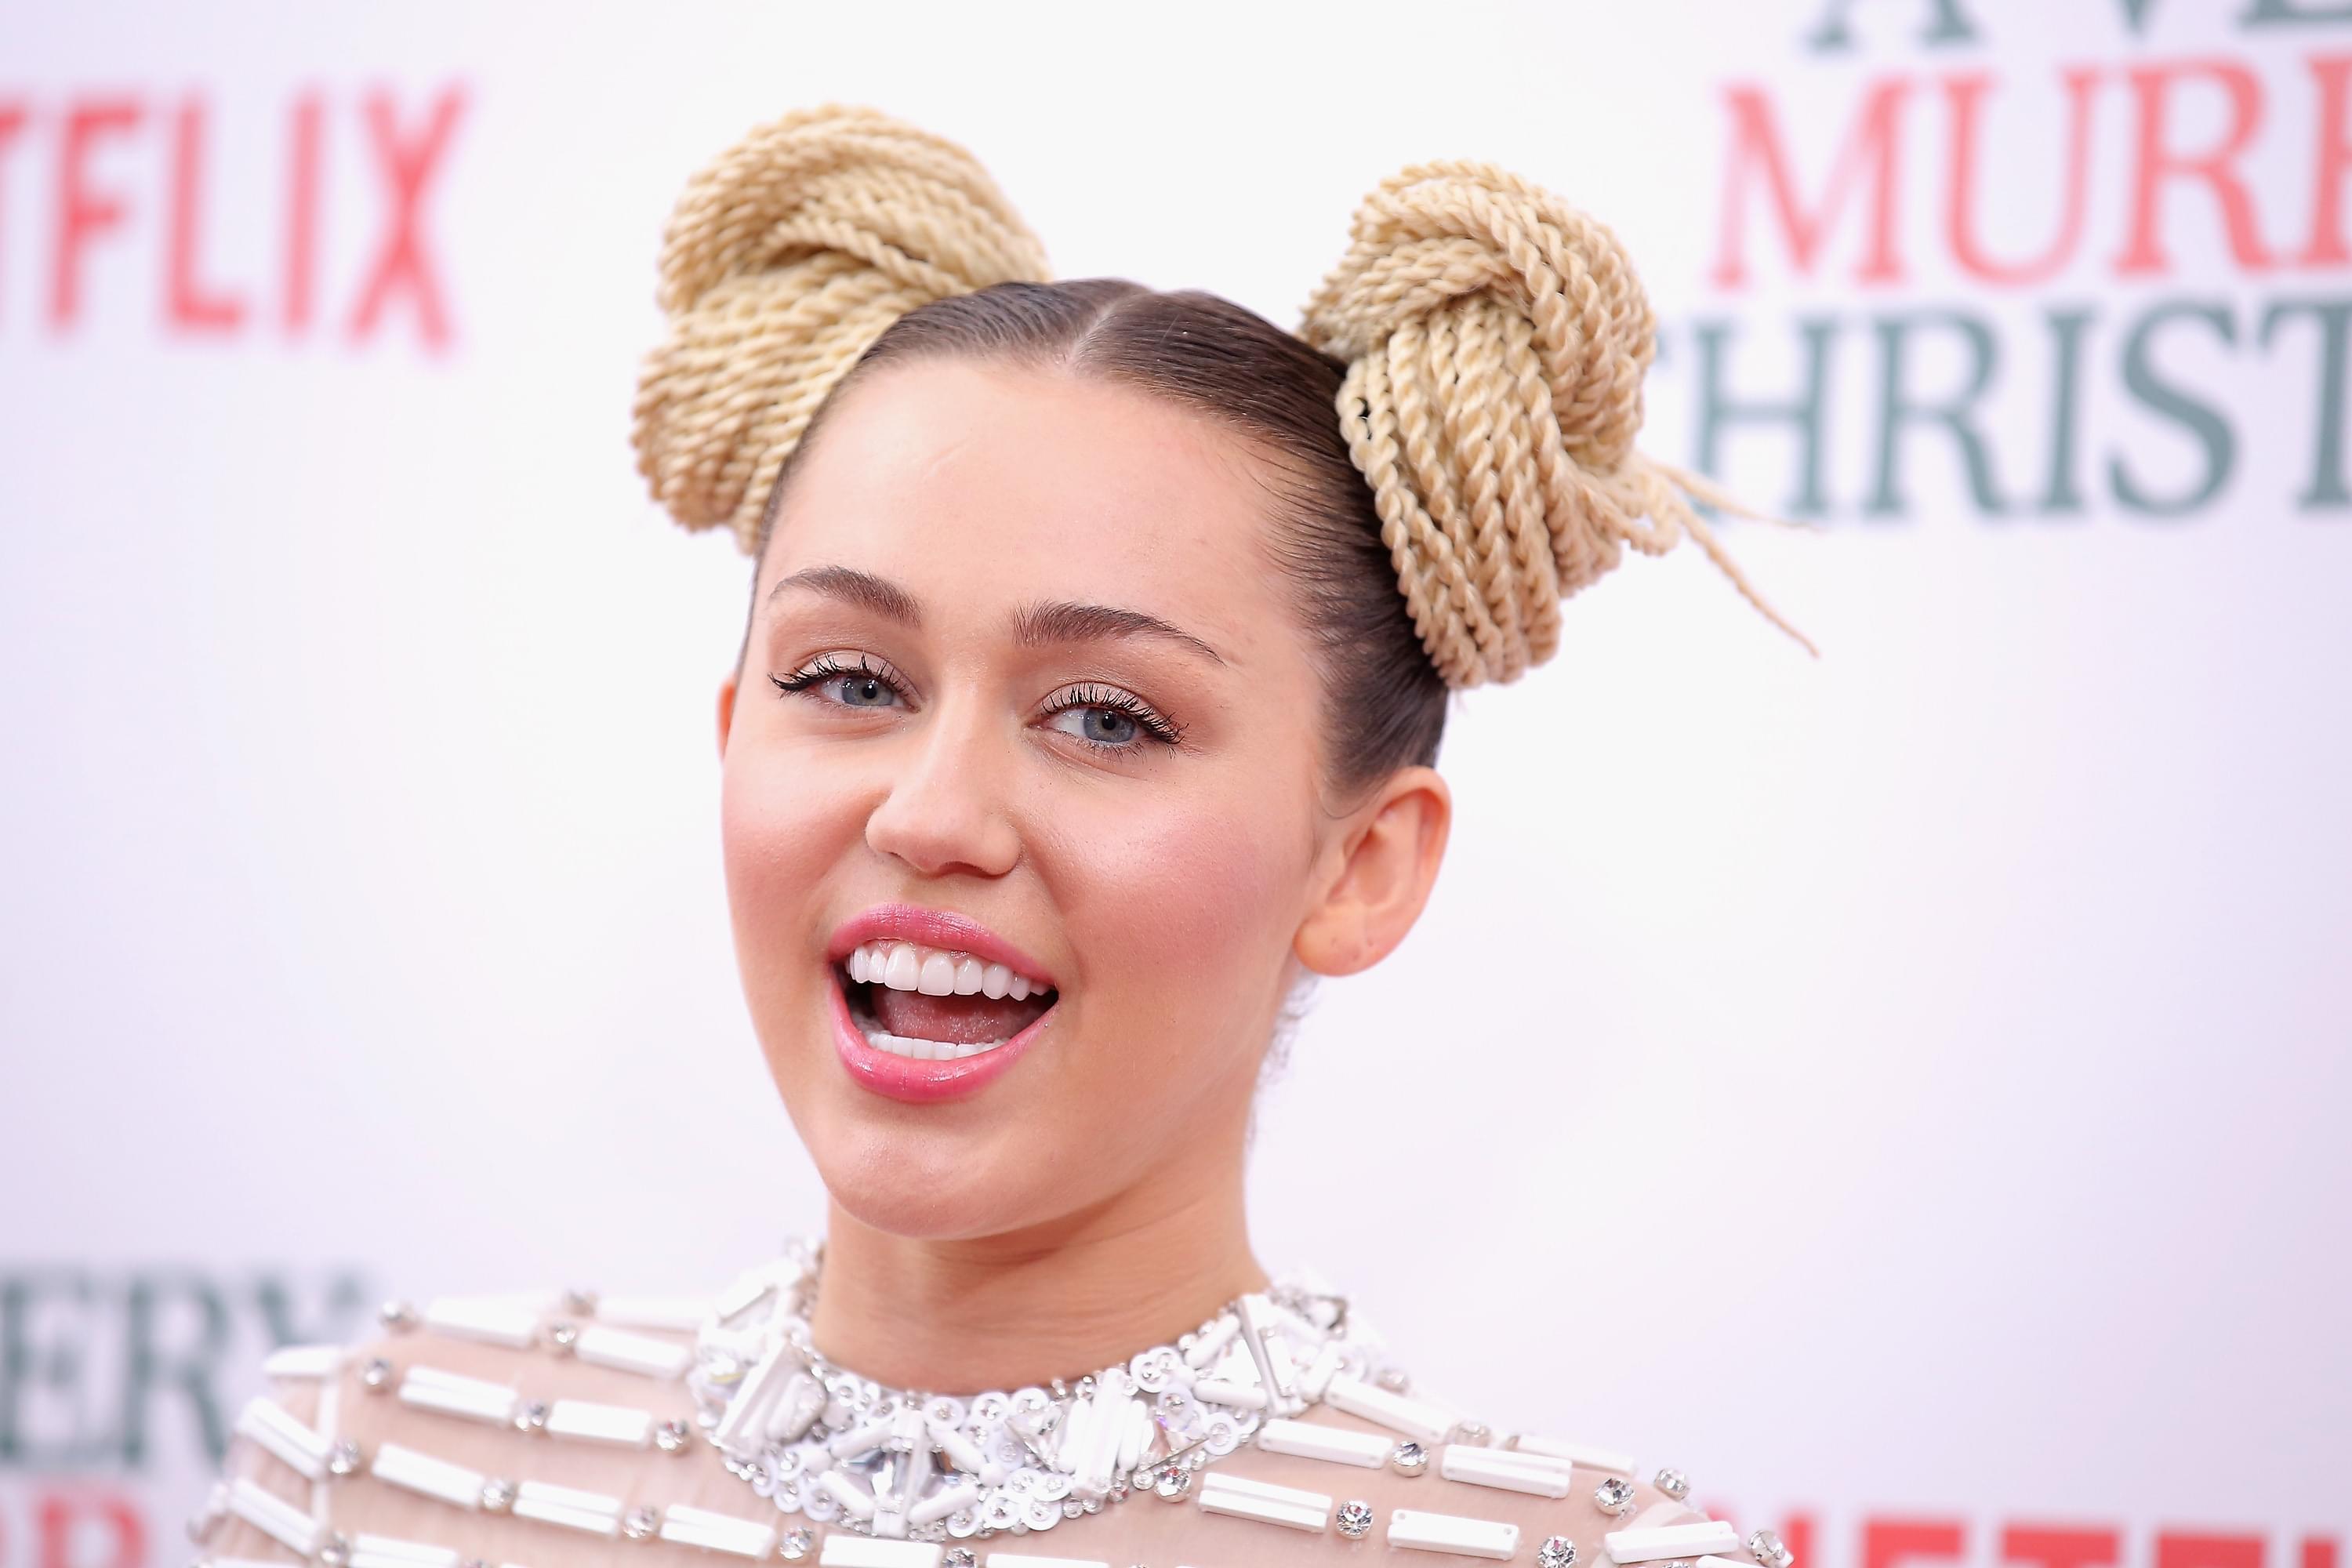 Miley Cyrus Rescued A New Dog And She’s The Cutest Thing [PHOTOS]